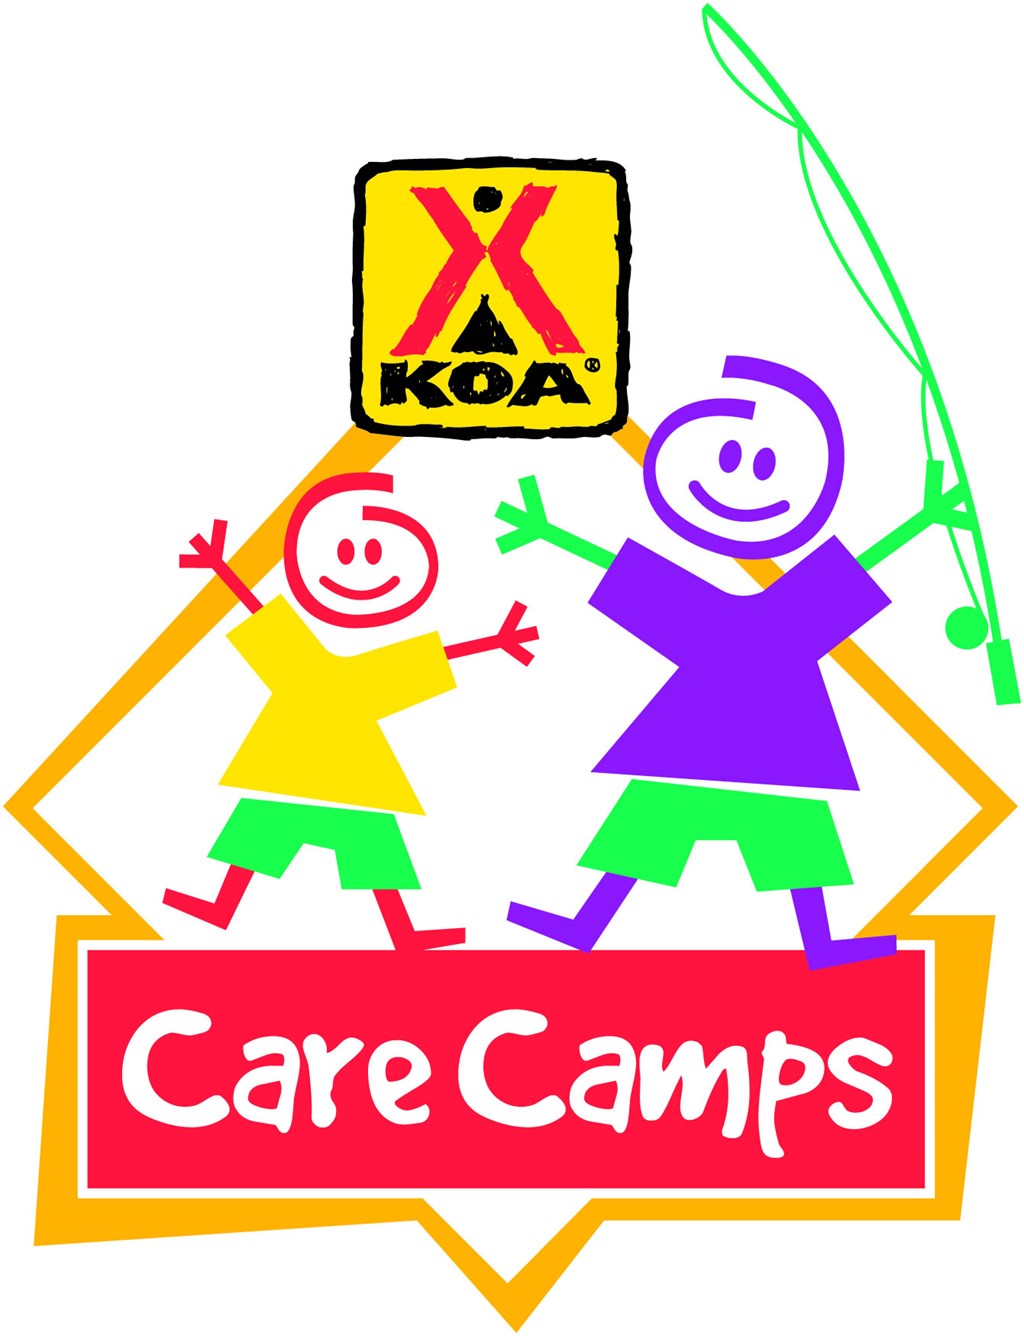 Large Donation from Lena KOA made to Care Camps